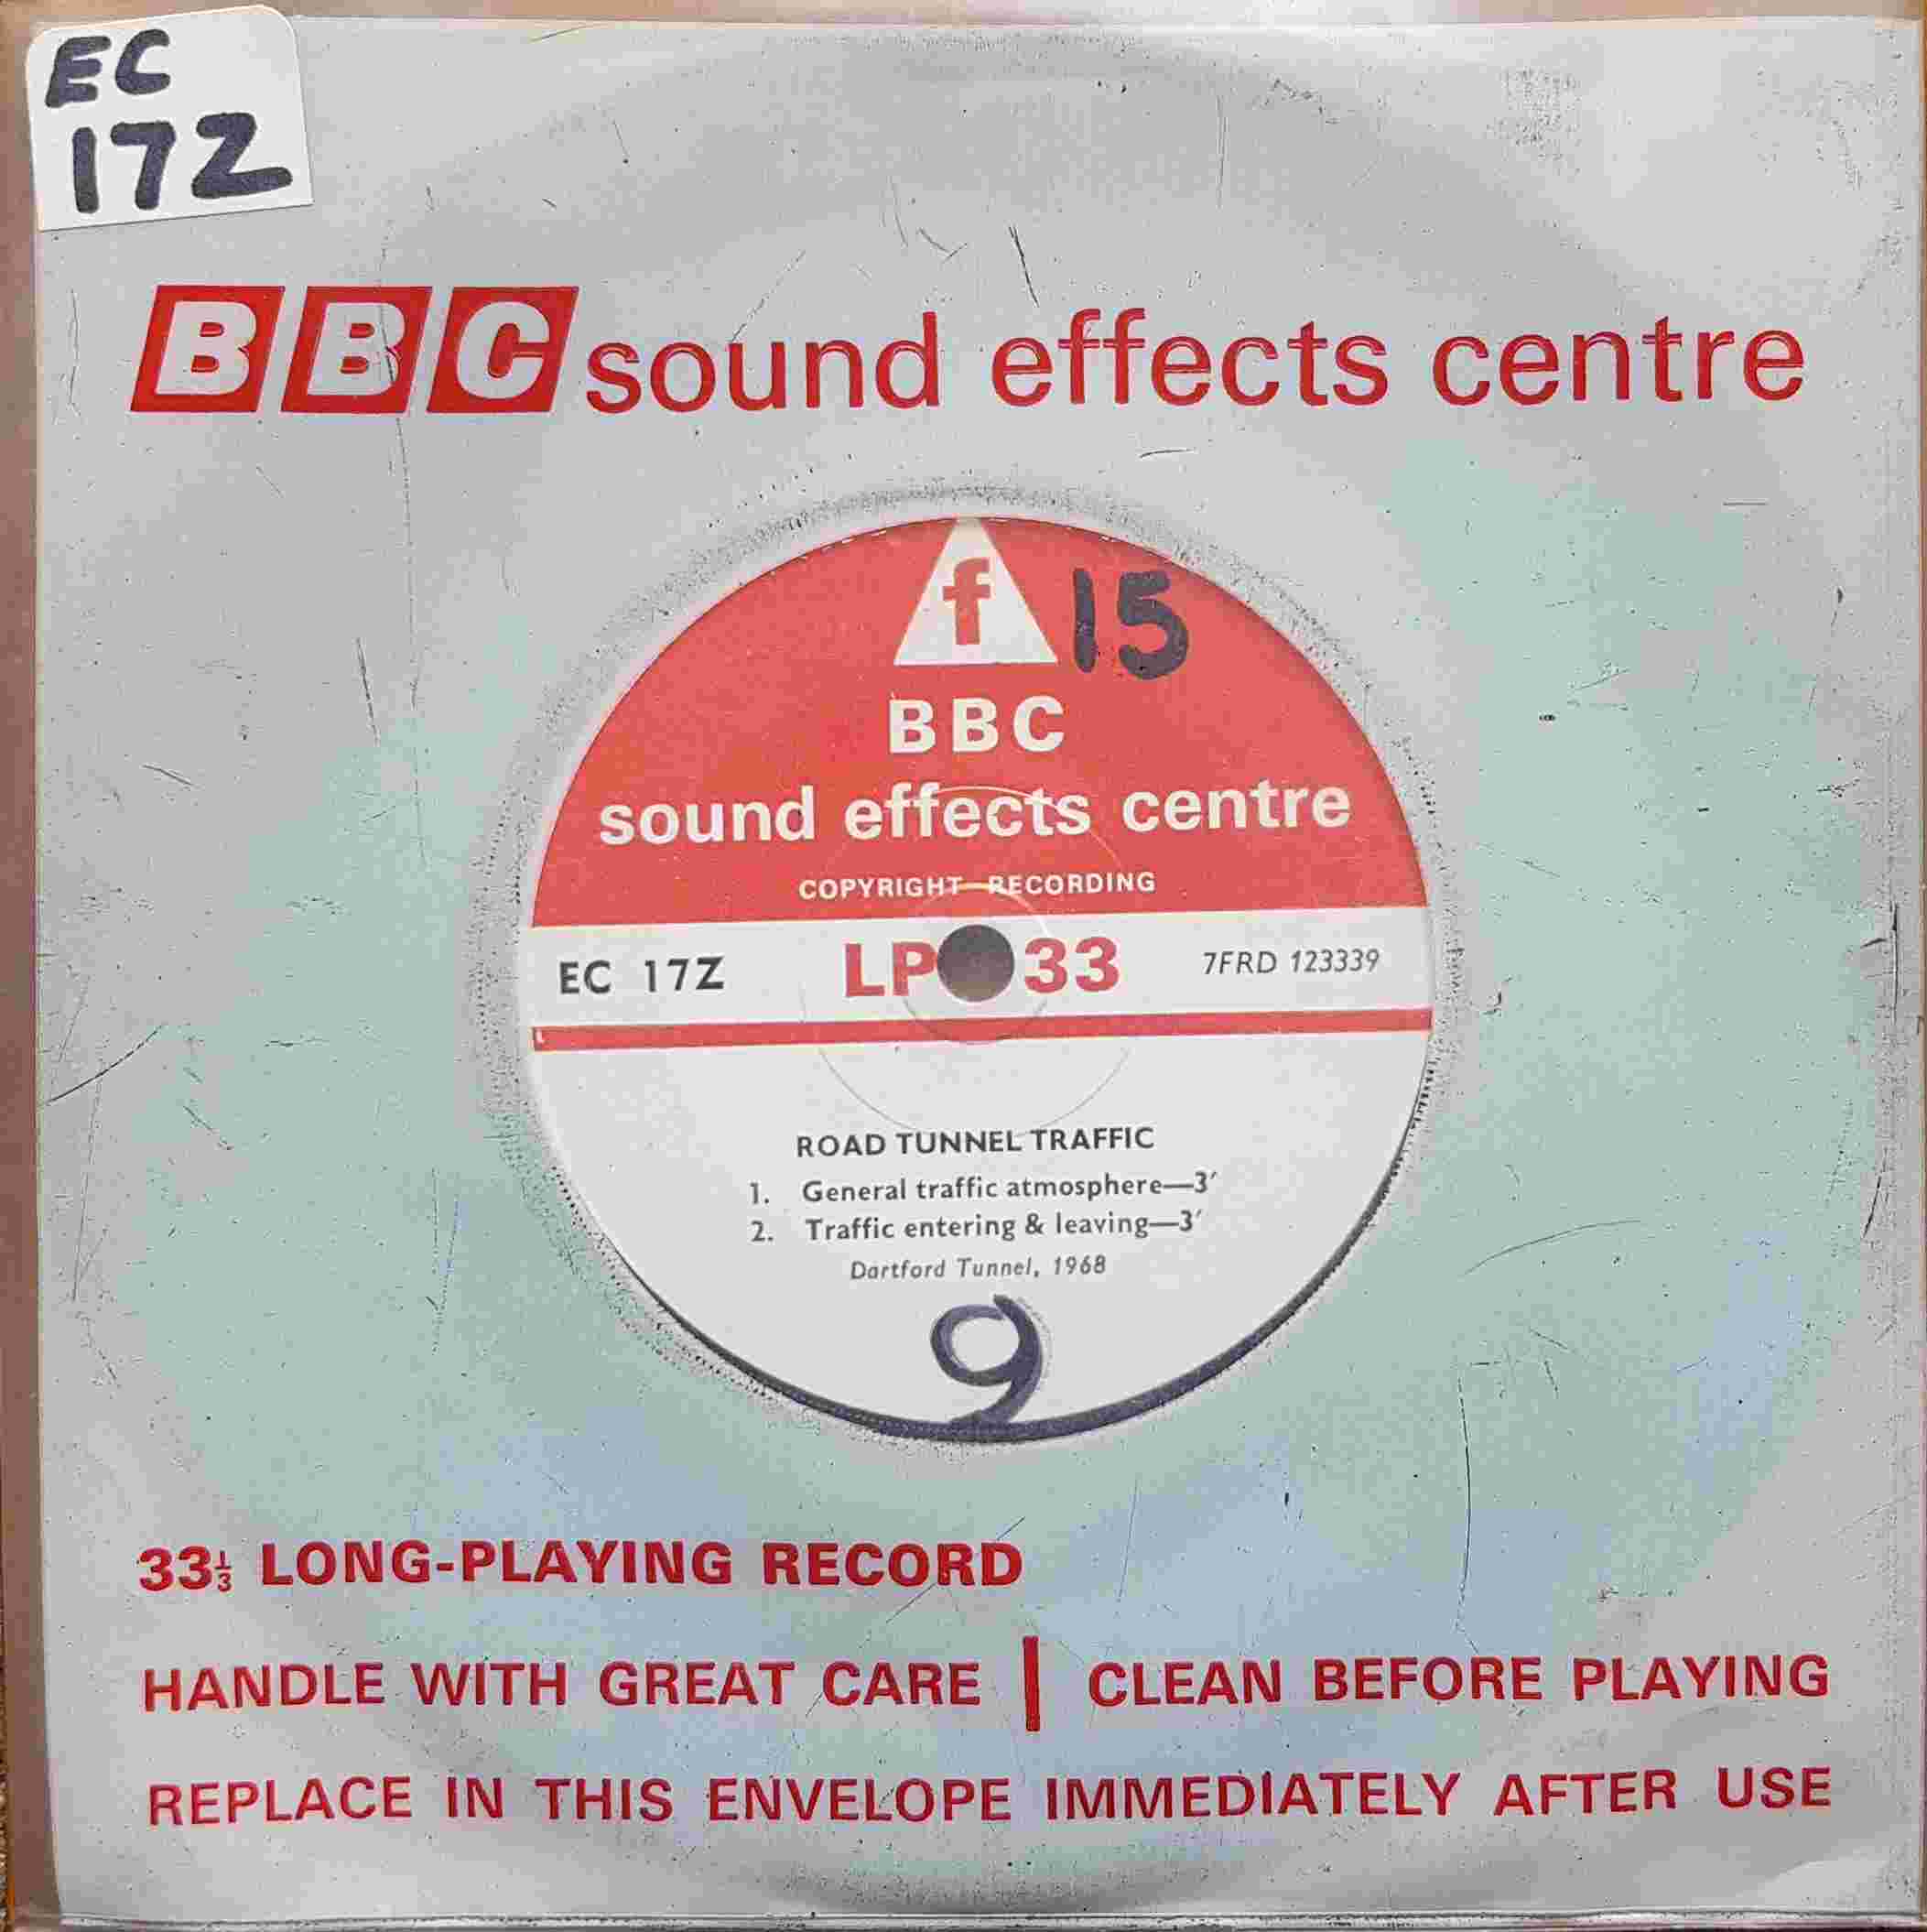 Picture of EC 17Z Road tunnel traffic by artist Not registered from the BBC singles - Records and Tapes library